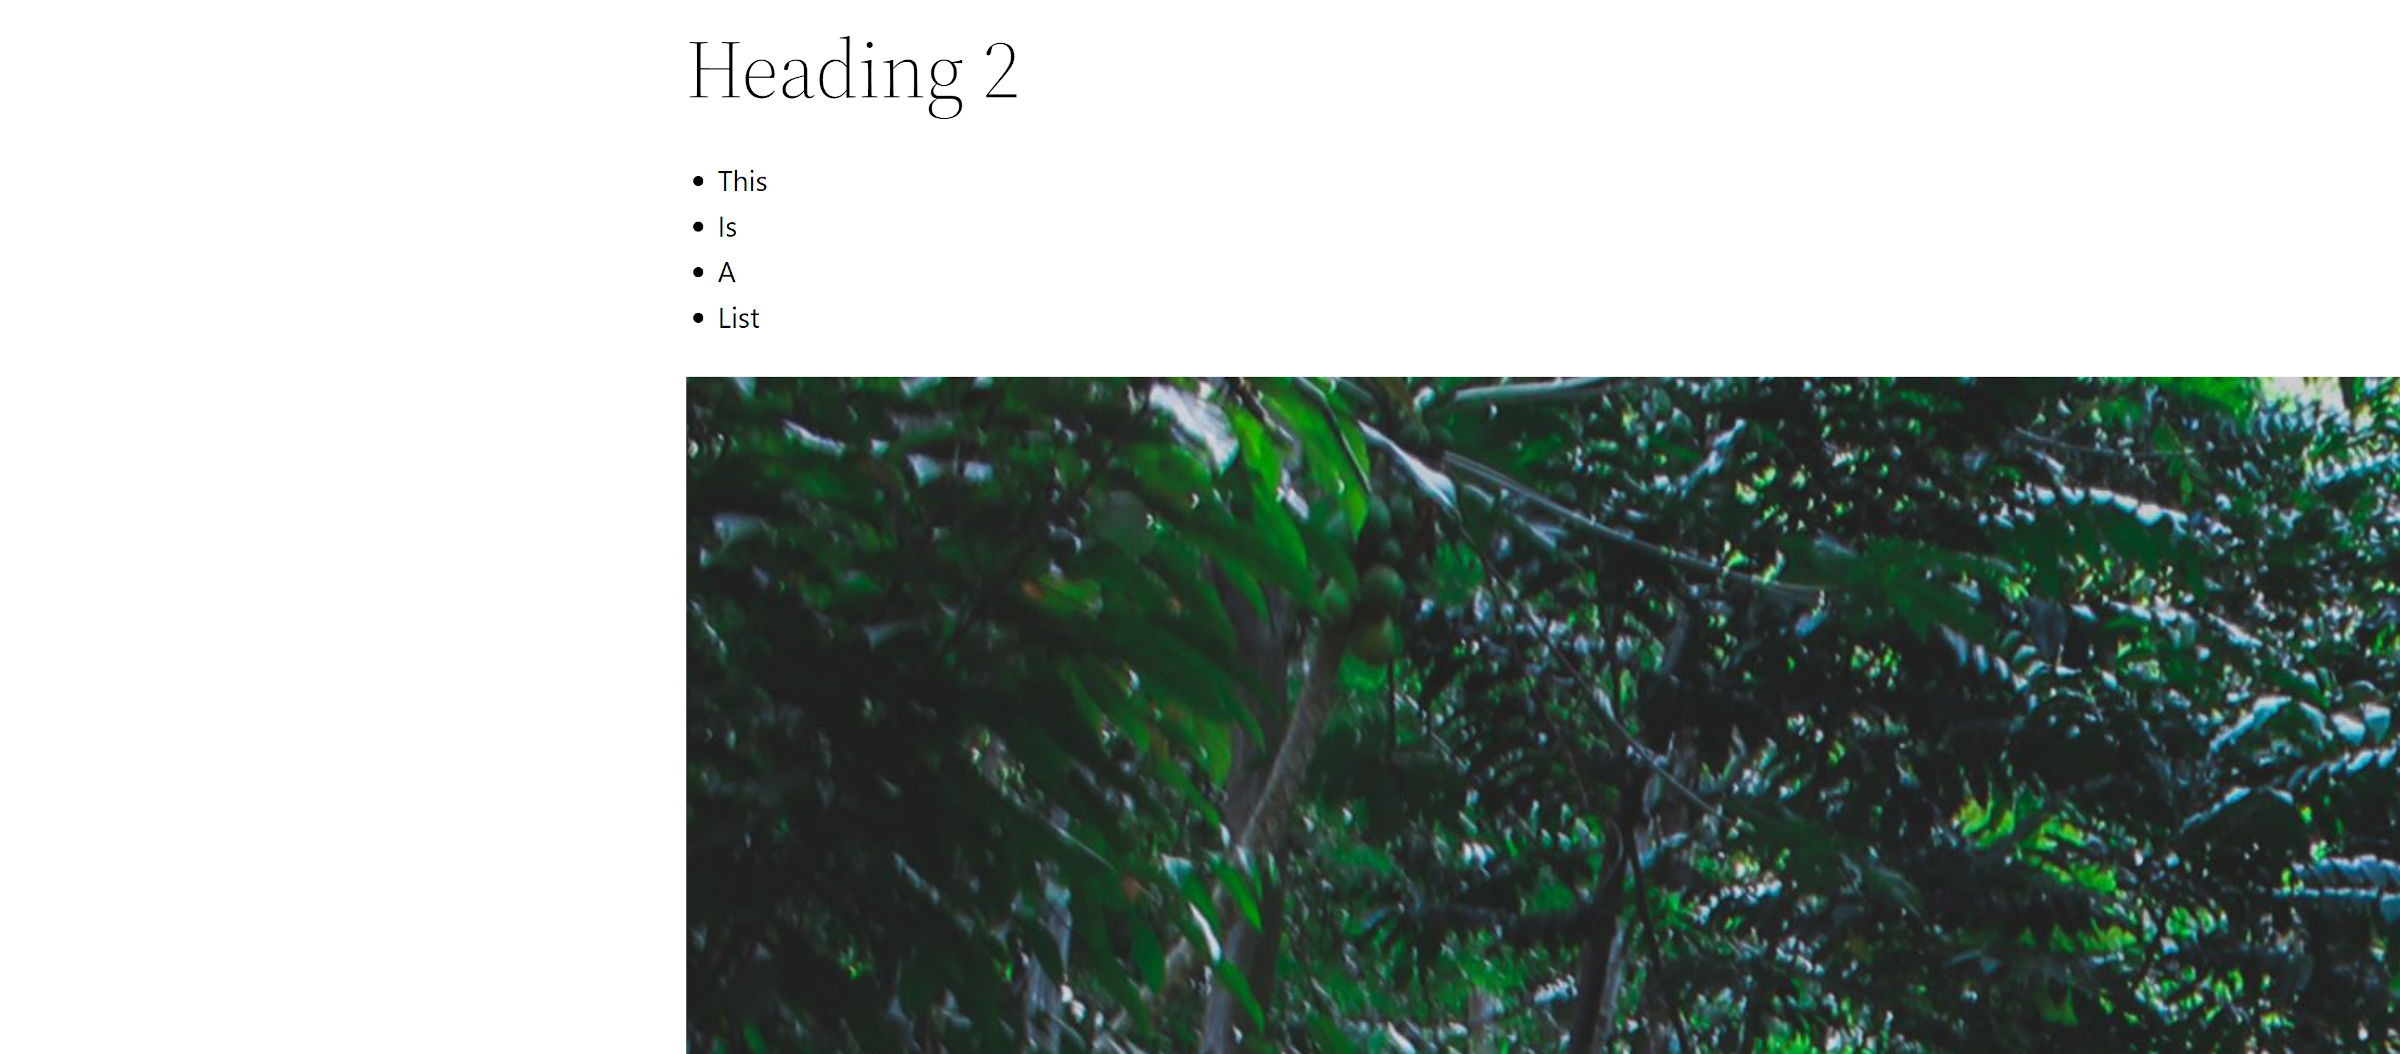 Release of the WordPress Twenty Twenty-Two theme where a large image comes out of the content on the right side of the screen.